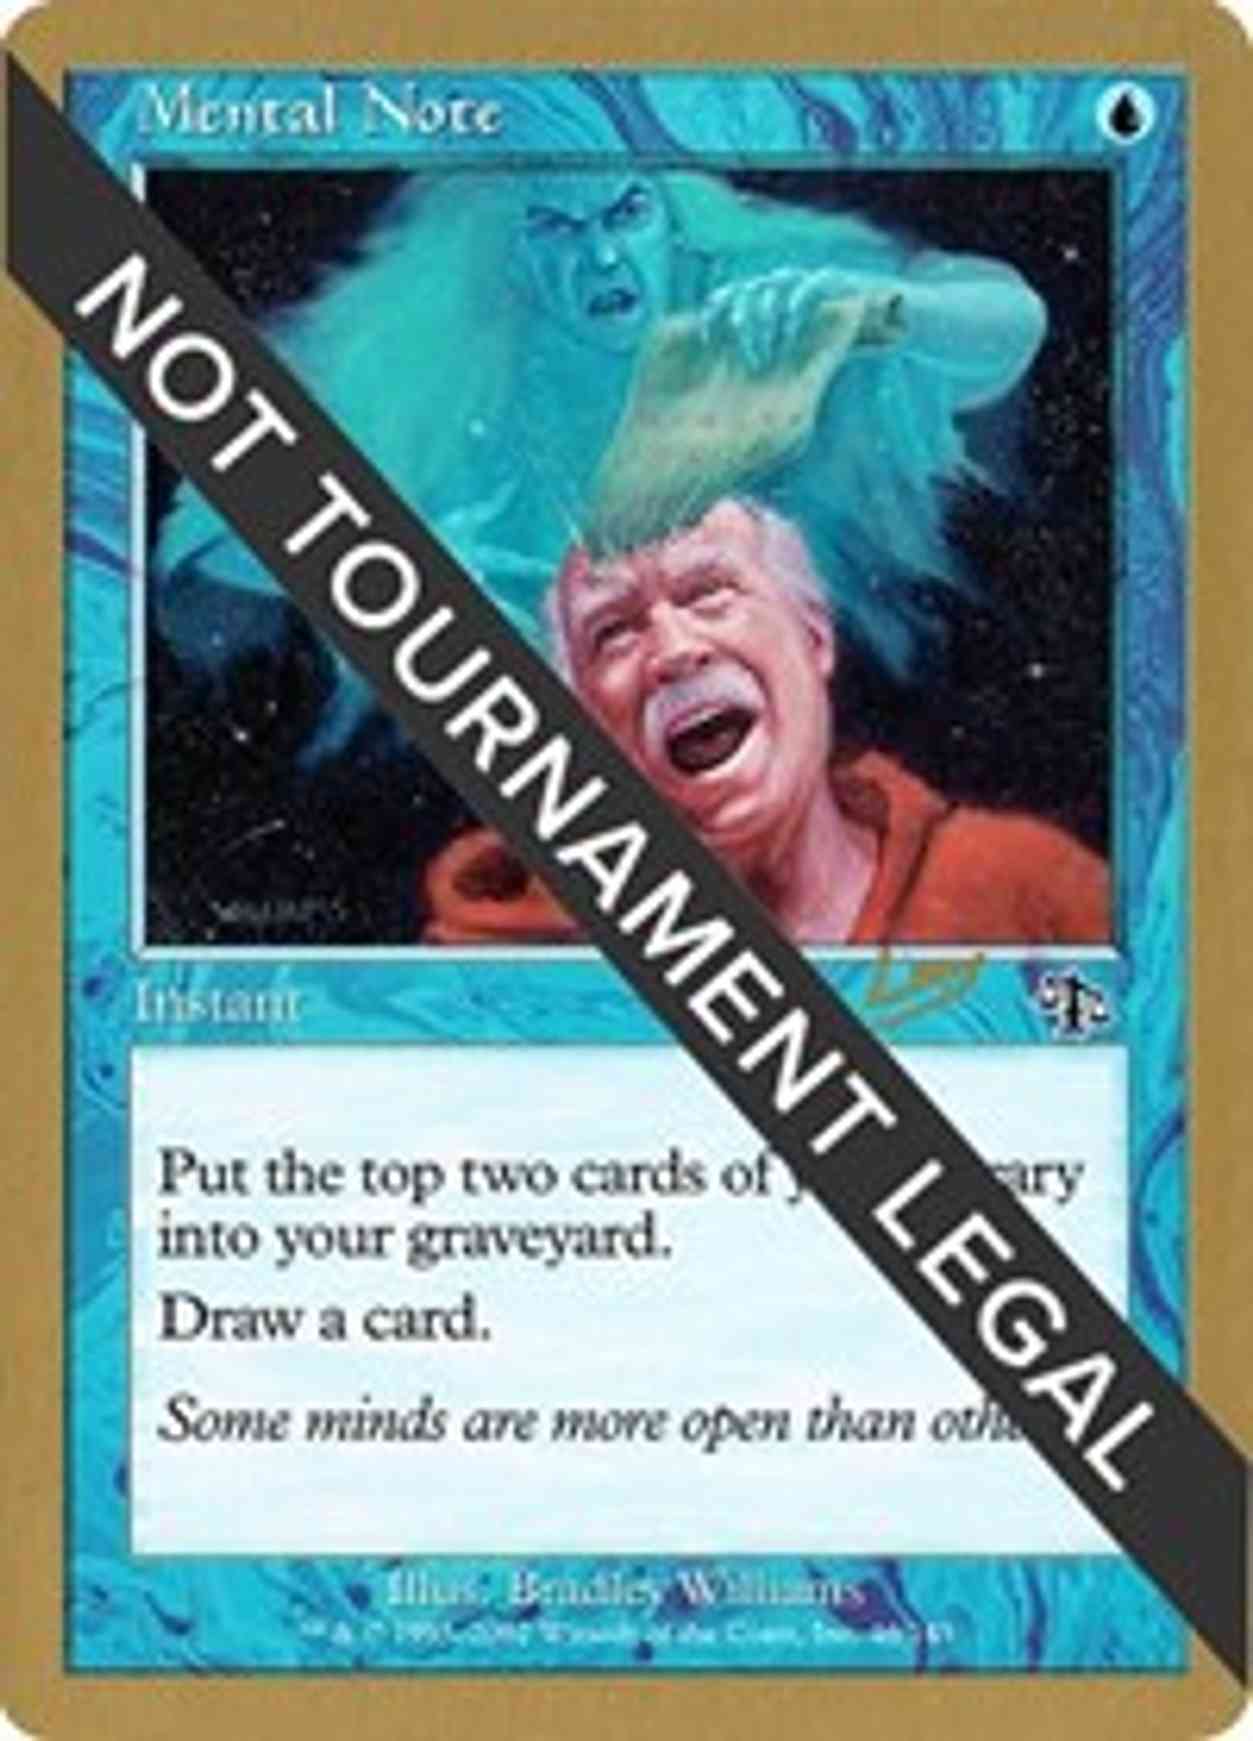 Mental Note - 2002 Raphael Levy (JUD) magic card front